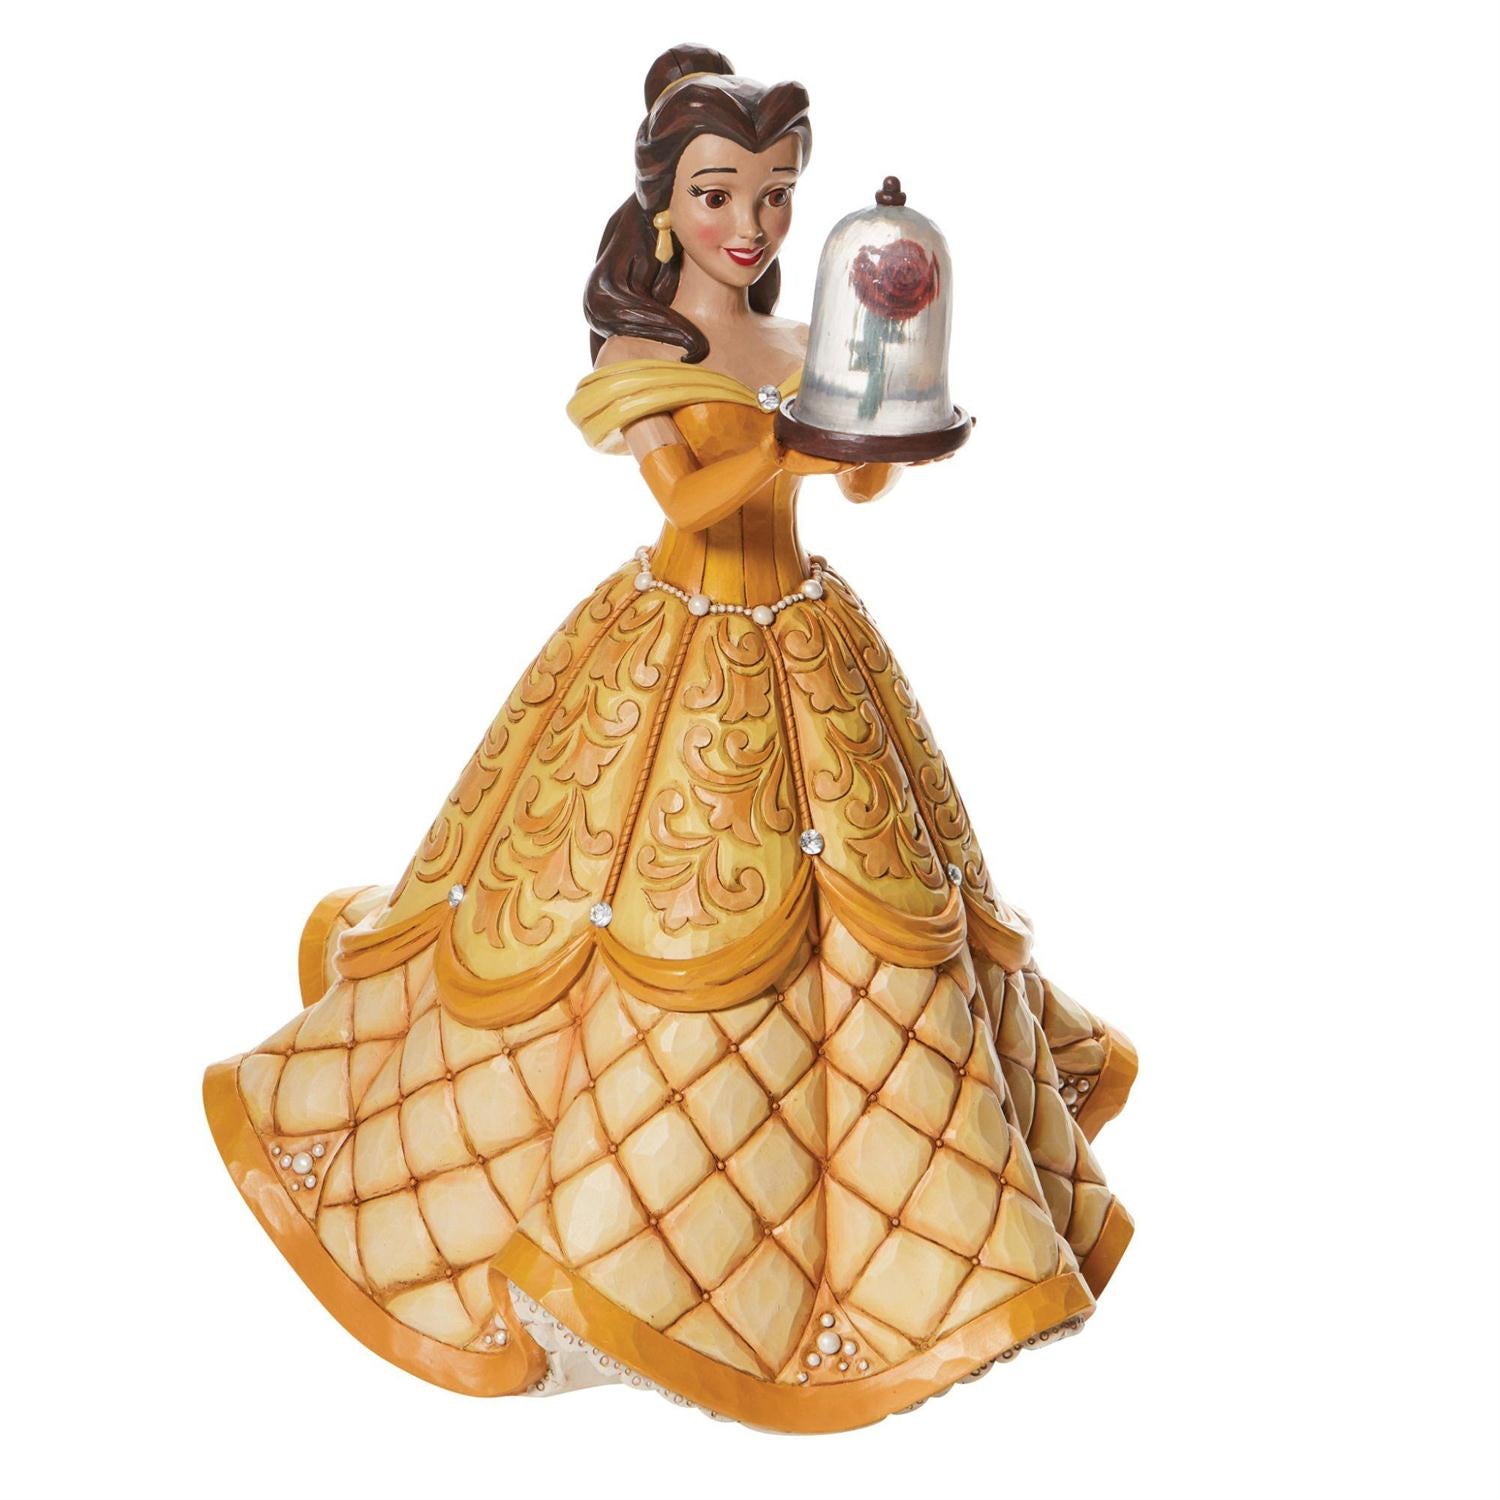 Holding the enchanted rose, Belle looks stunning in her golden ball gown.